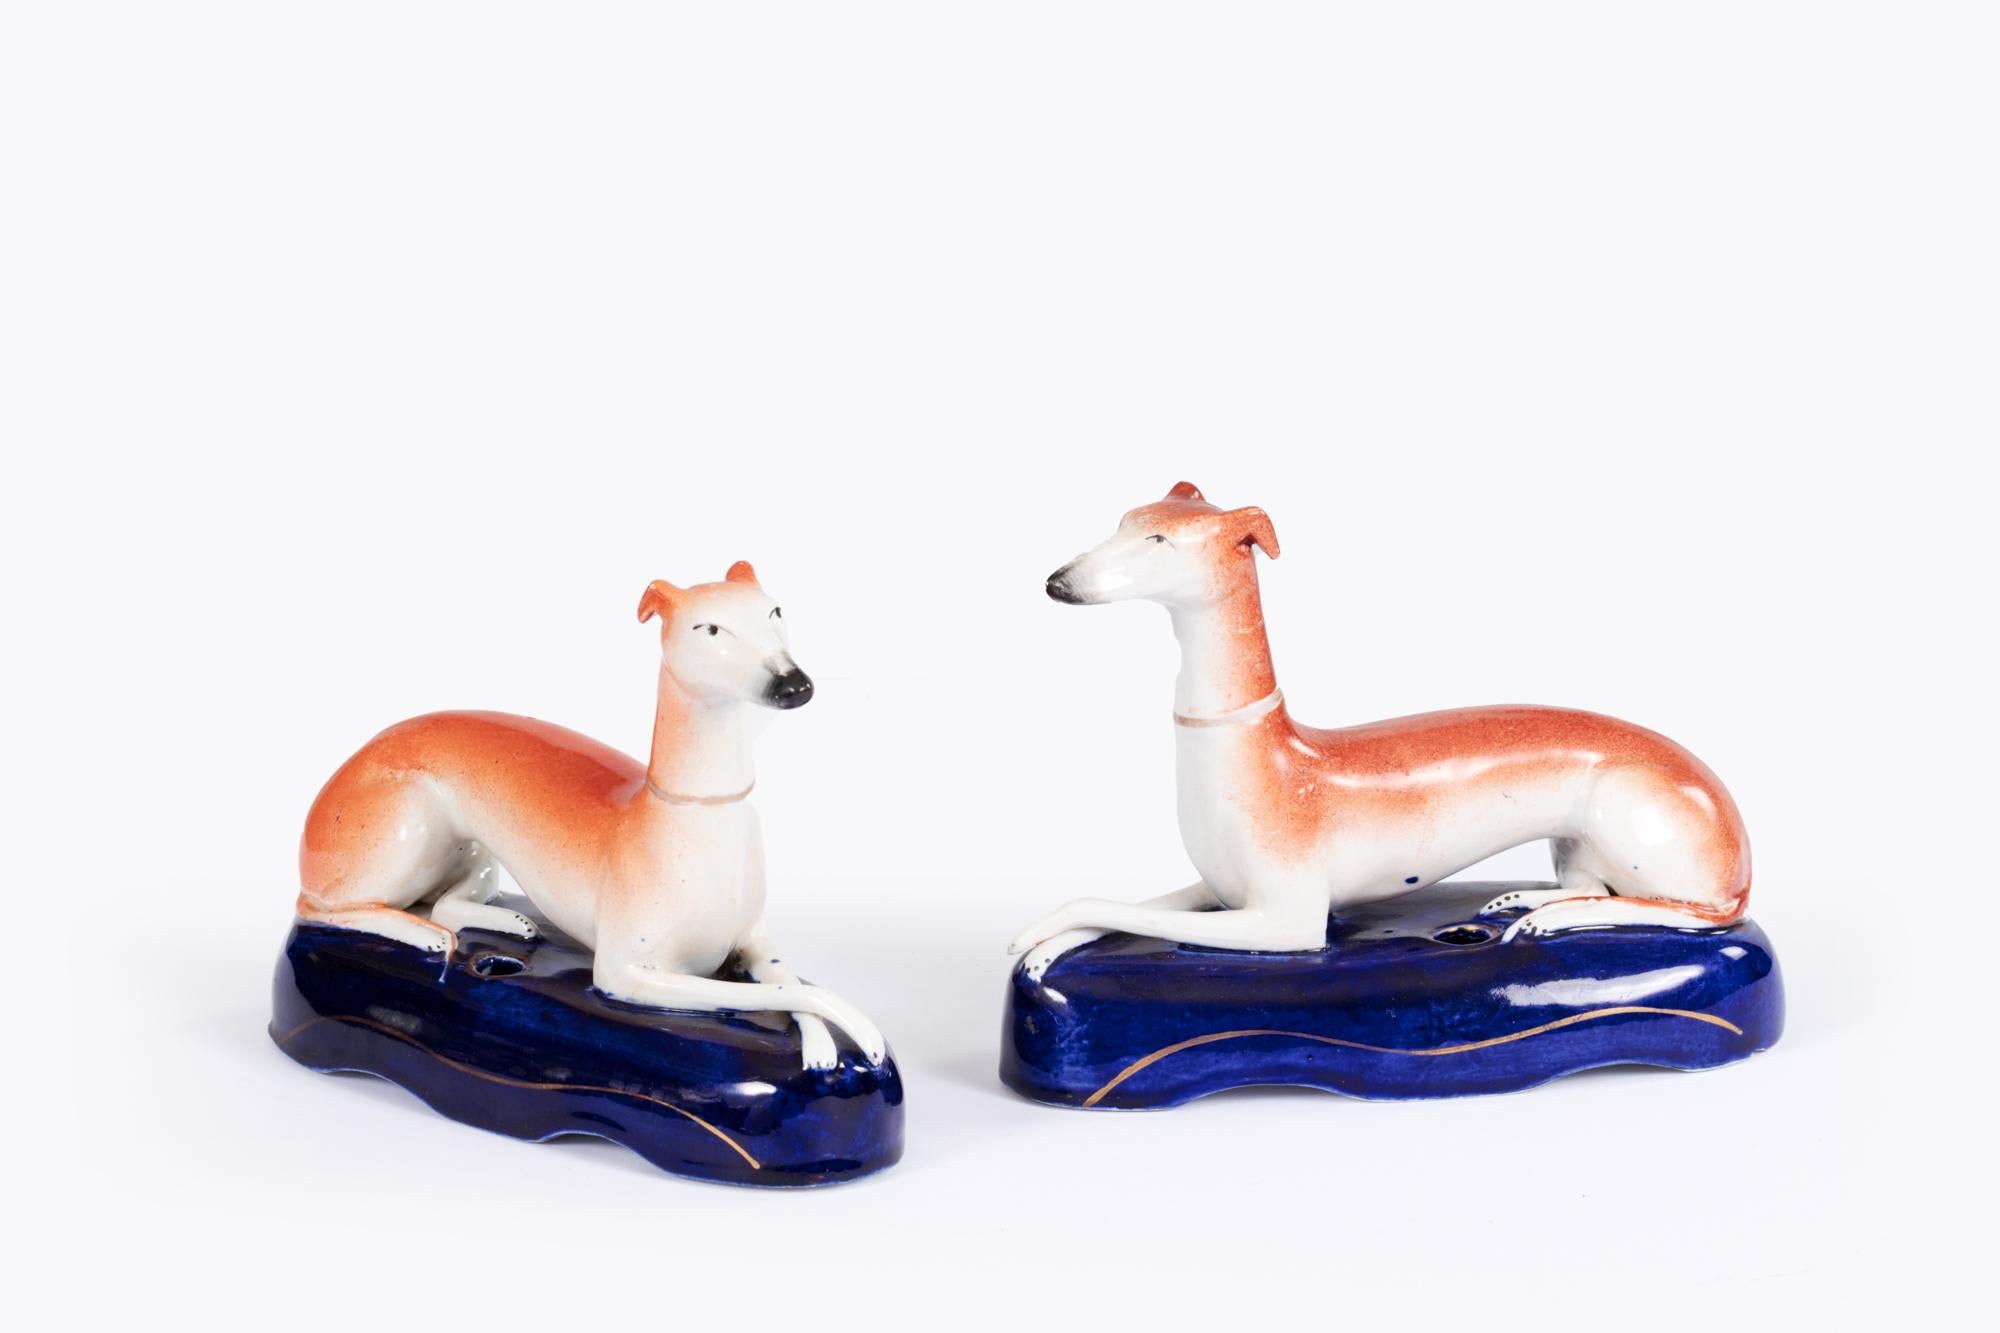 19th Century pair Staffordshire pottery pen stands in the form of resting greyhounds. The pair are poised with crossed paws laying on a cobalt blue scalloped pedestal with gold gilt trim. Circa 1860.